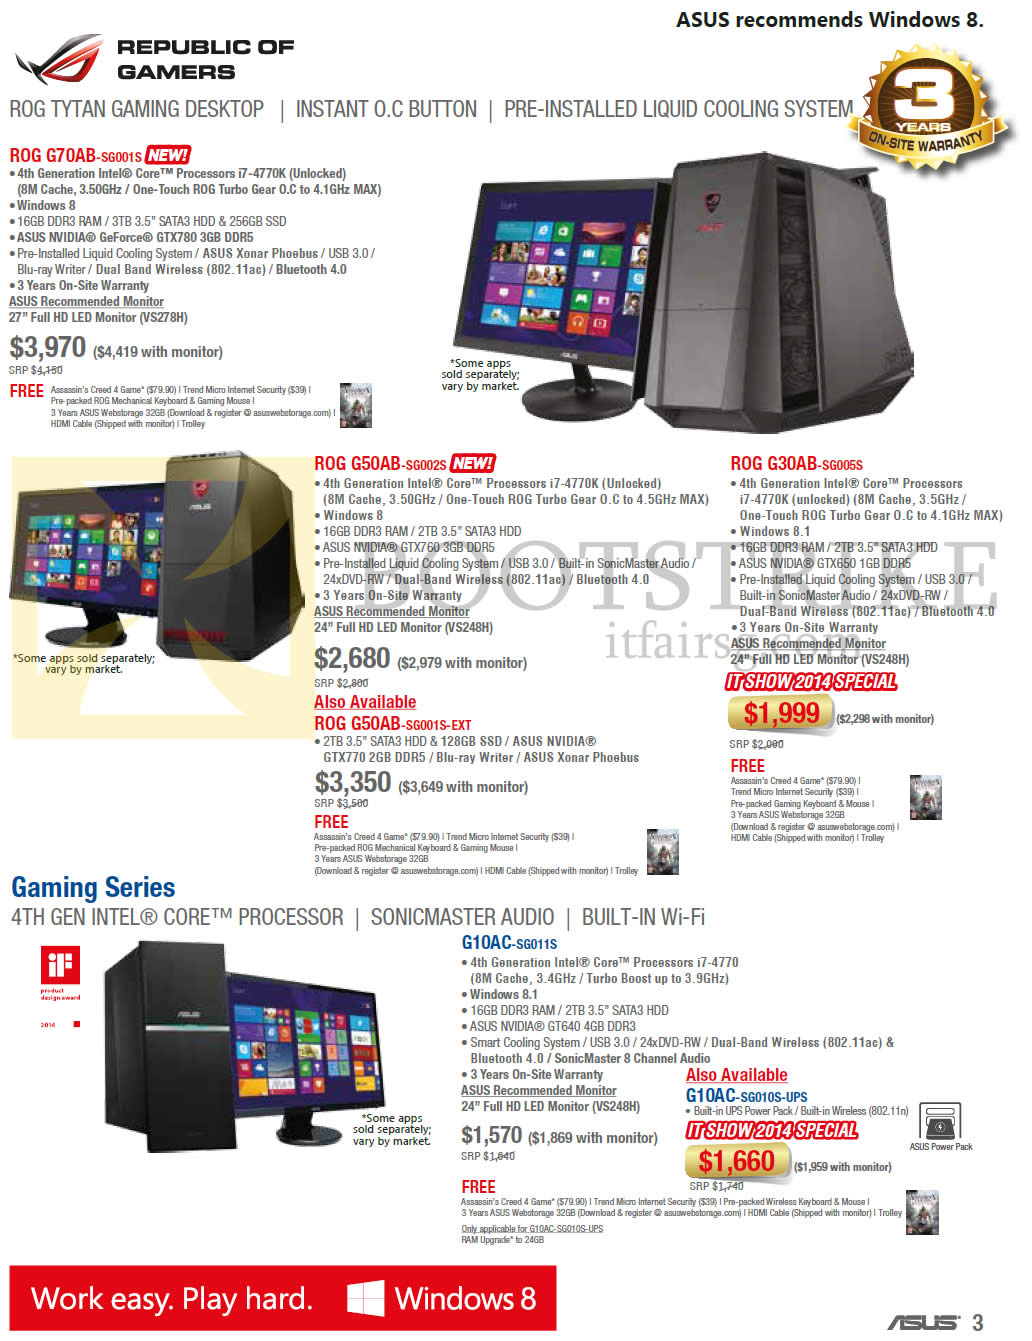 IT SHOW 2014 price list image brochure of ASUS Desktop PCs ROG G70AB-SG001s, G50AB-SG002S, G30AB-SG005S, G50AB-SG001S-EXT, G10AC-SG011S UPS